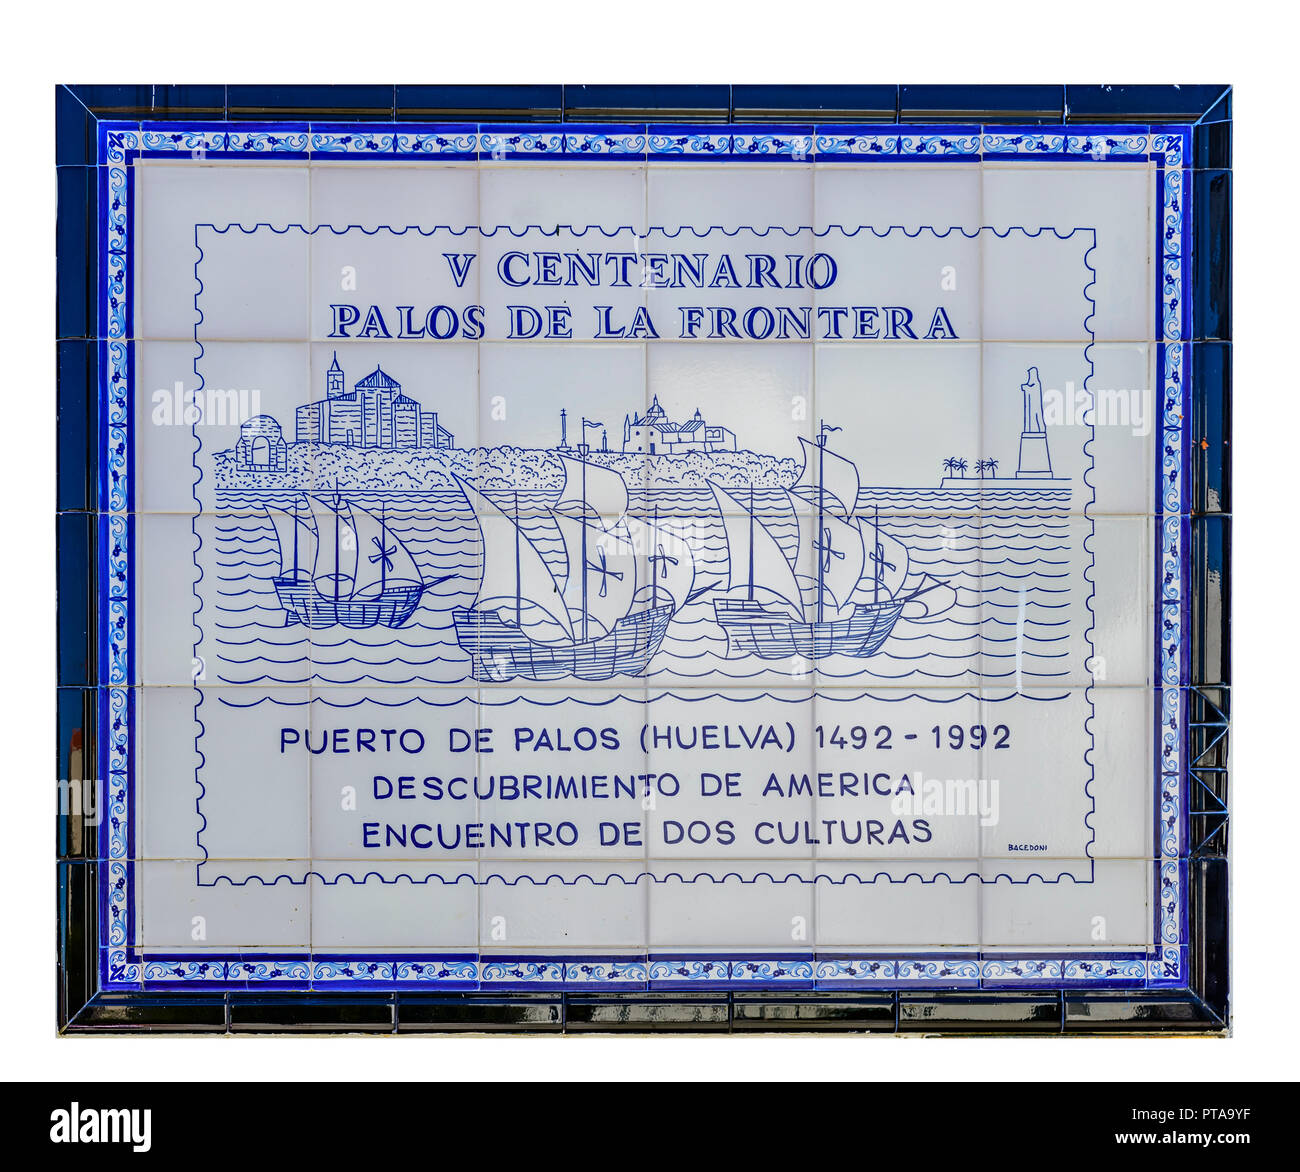 Tiled plaque commemorating the 500th aniversary of the dicovery of America by Christopher Columbus in 1492 Stock Photo